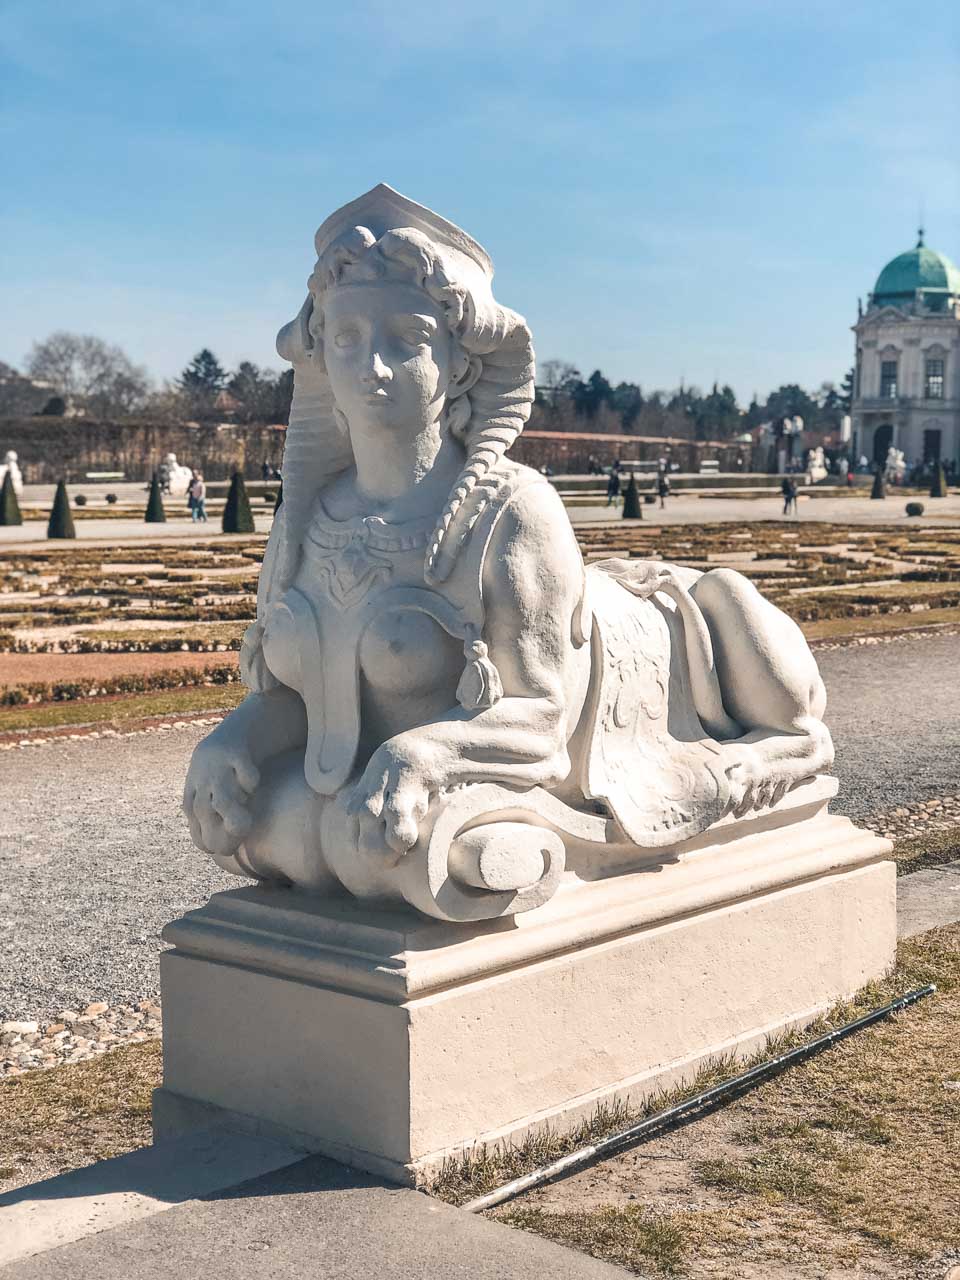 A sculpture in the garden area of the Belvedere Palace in Vienna, Austria